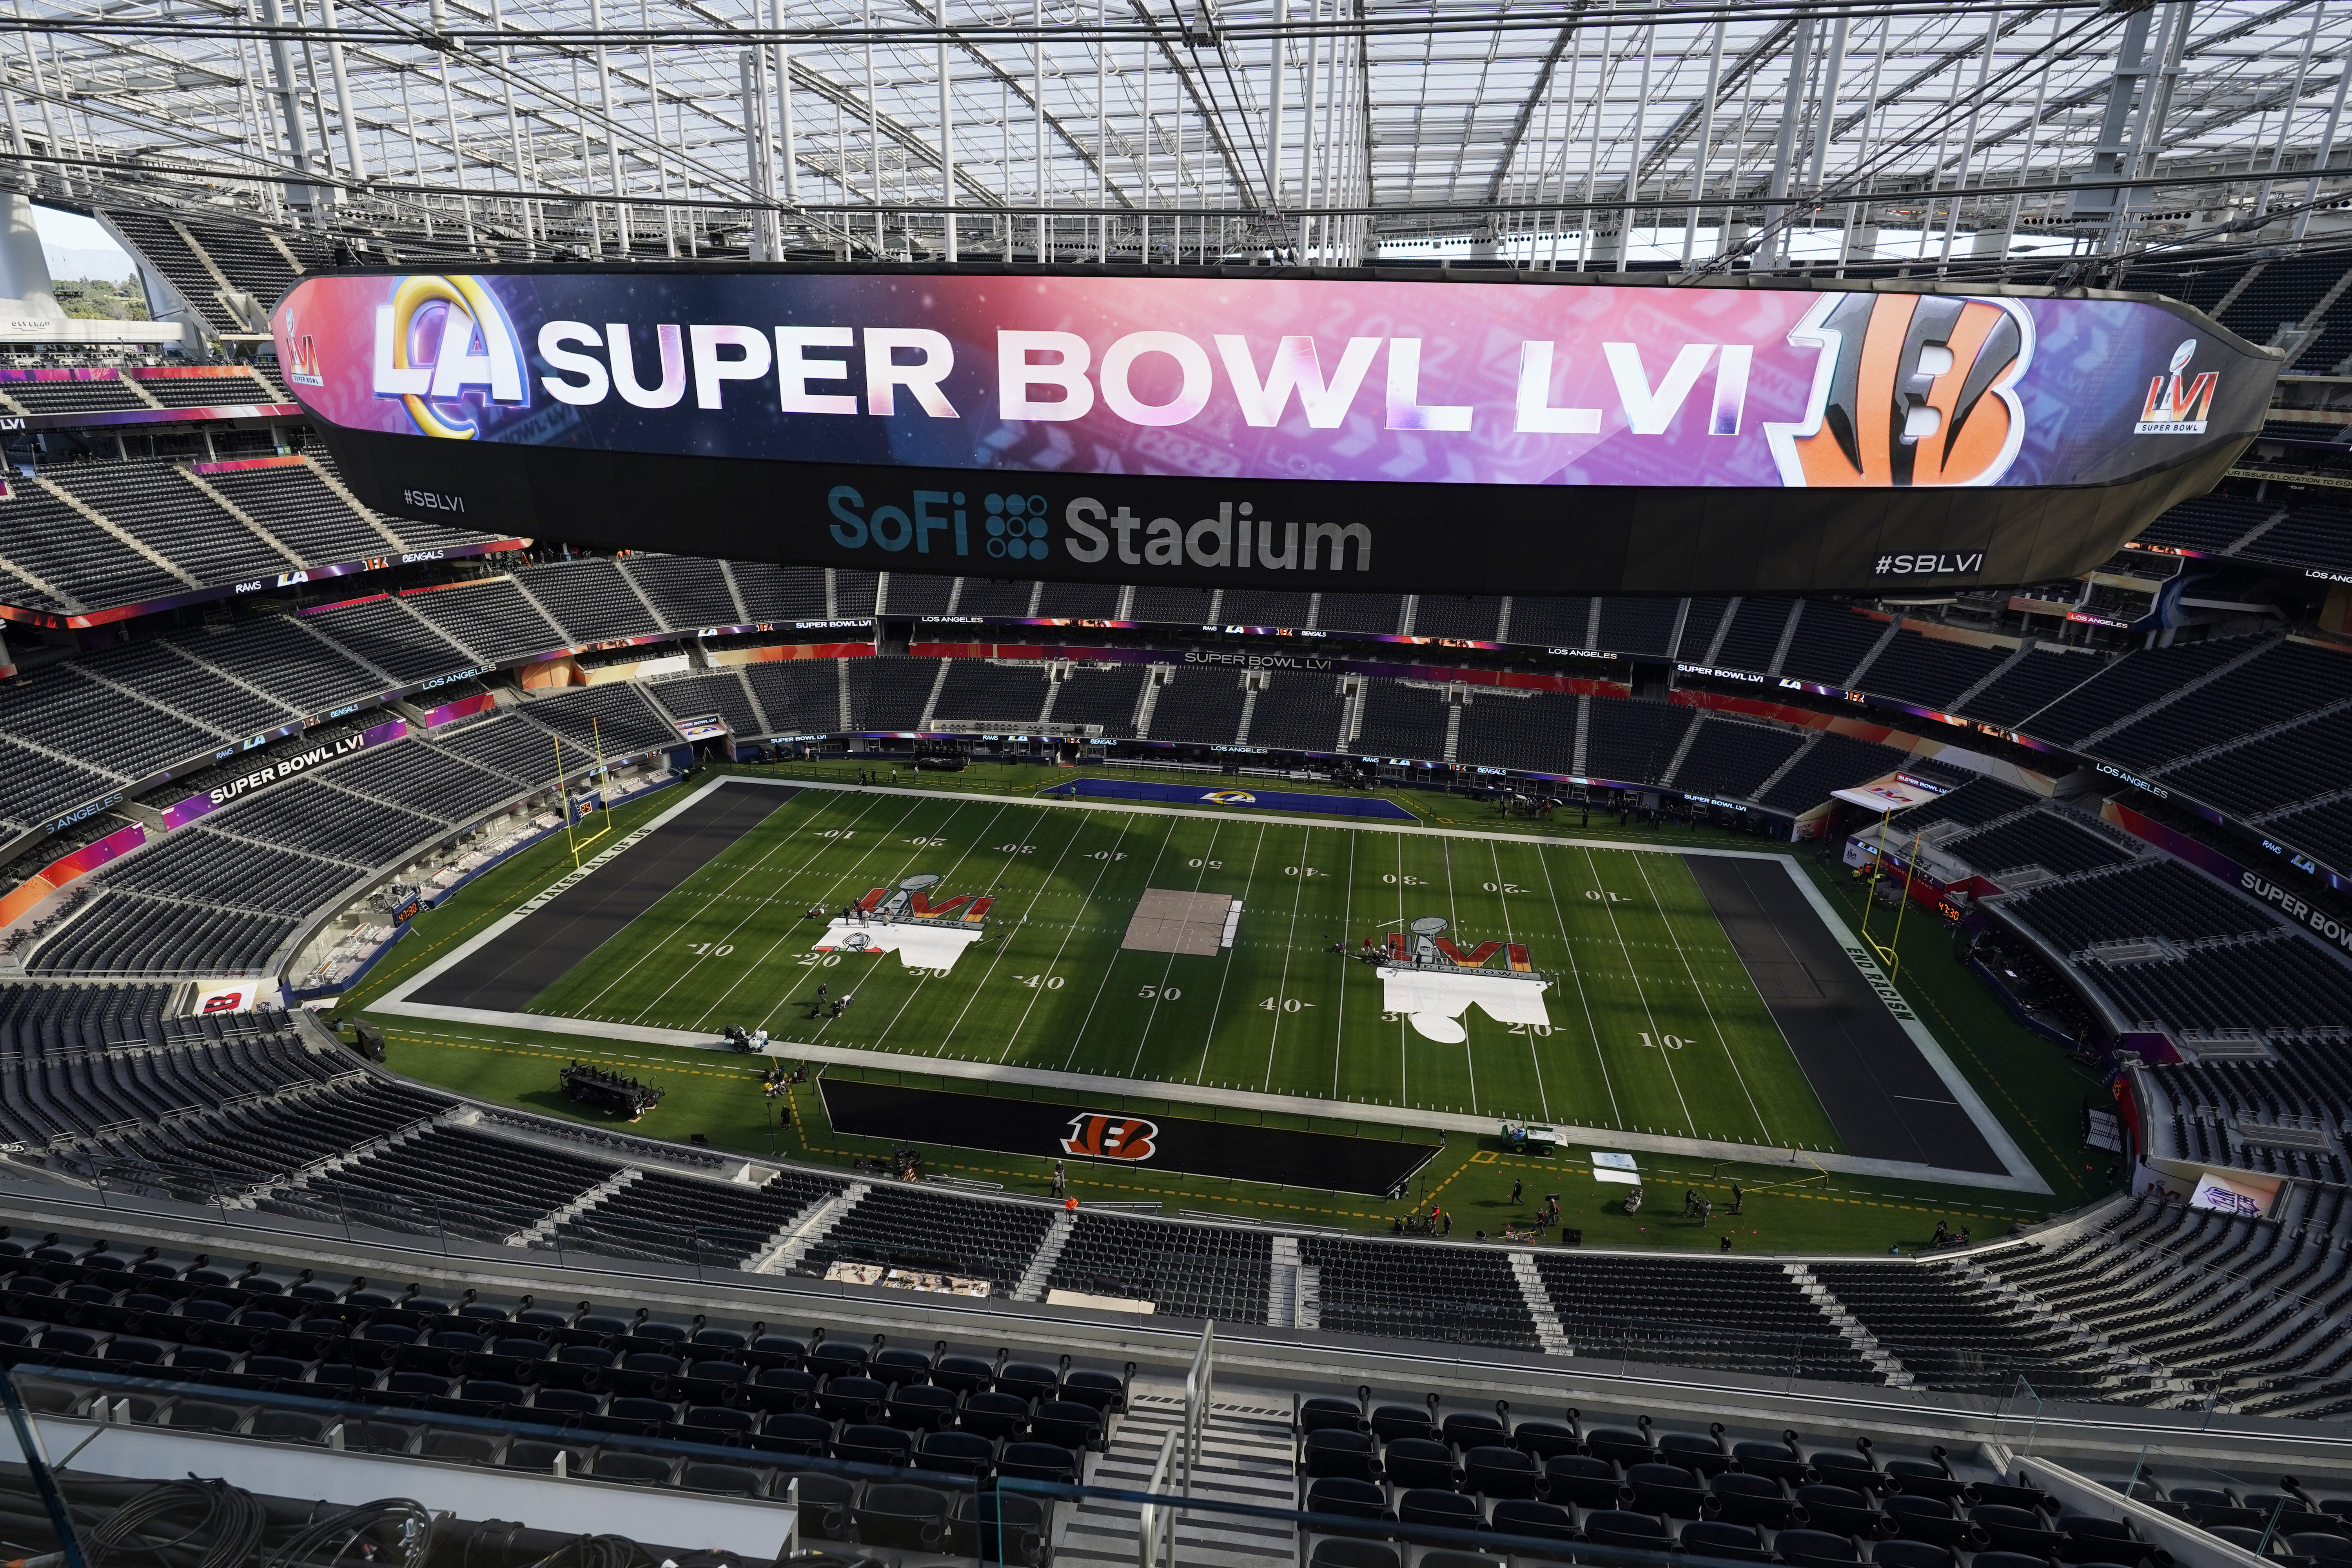 Who is in Super Bowl 2022? Here are the teams, odds & spread for Super Bowl  56 matchup